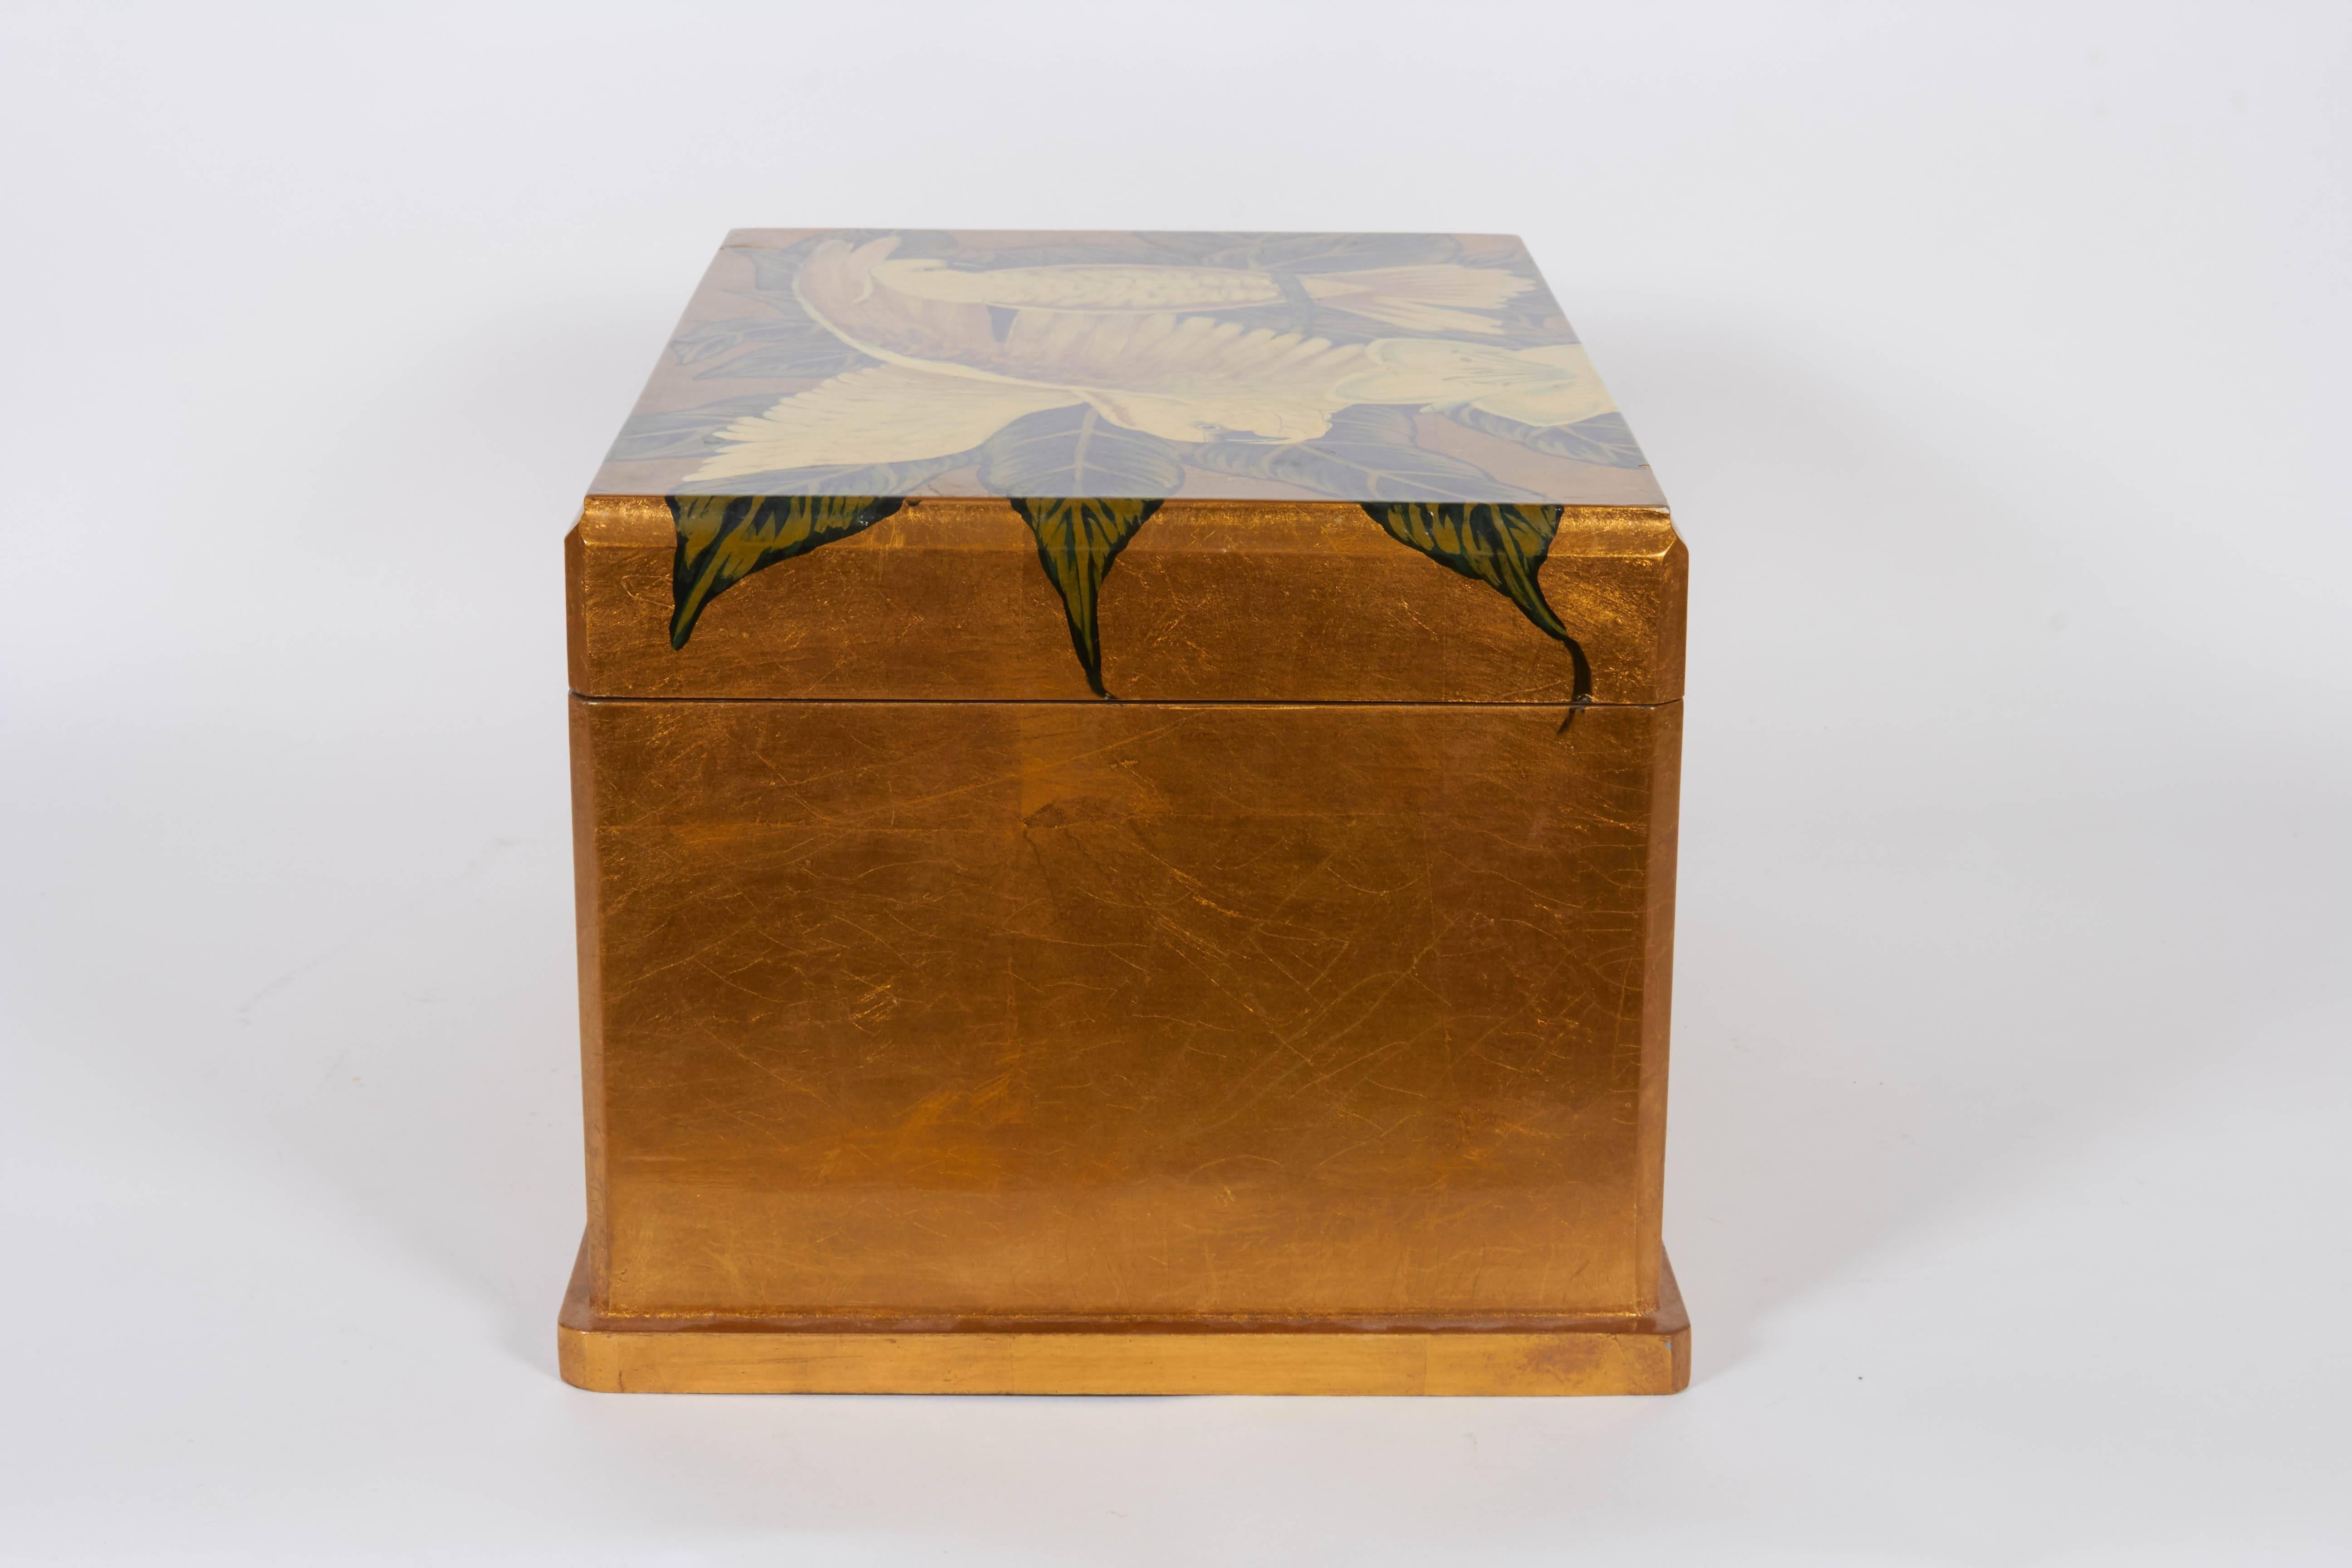 Hand-Painted Gold Leaf Jewelry Box with Cockatoos 2